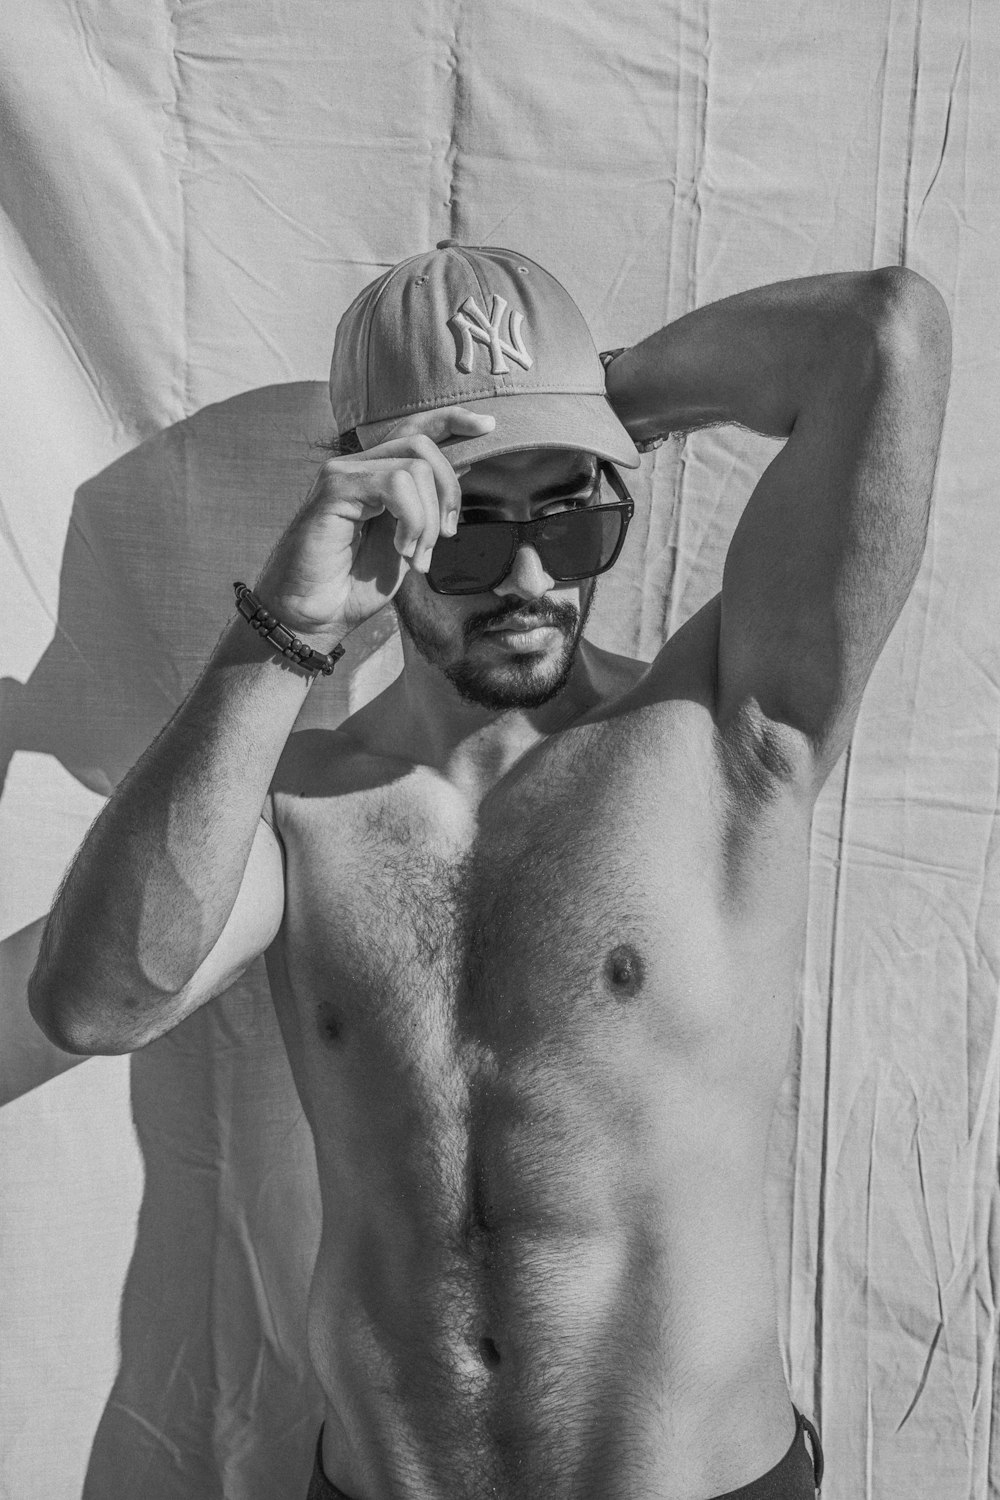 a shirtless man wearing a hat and sunglasses